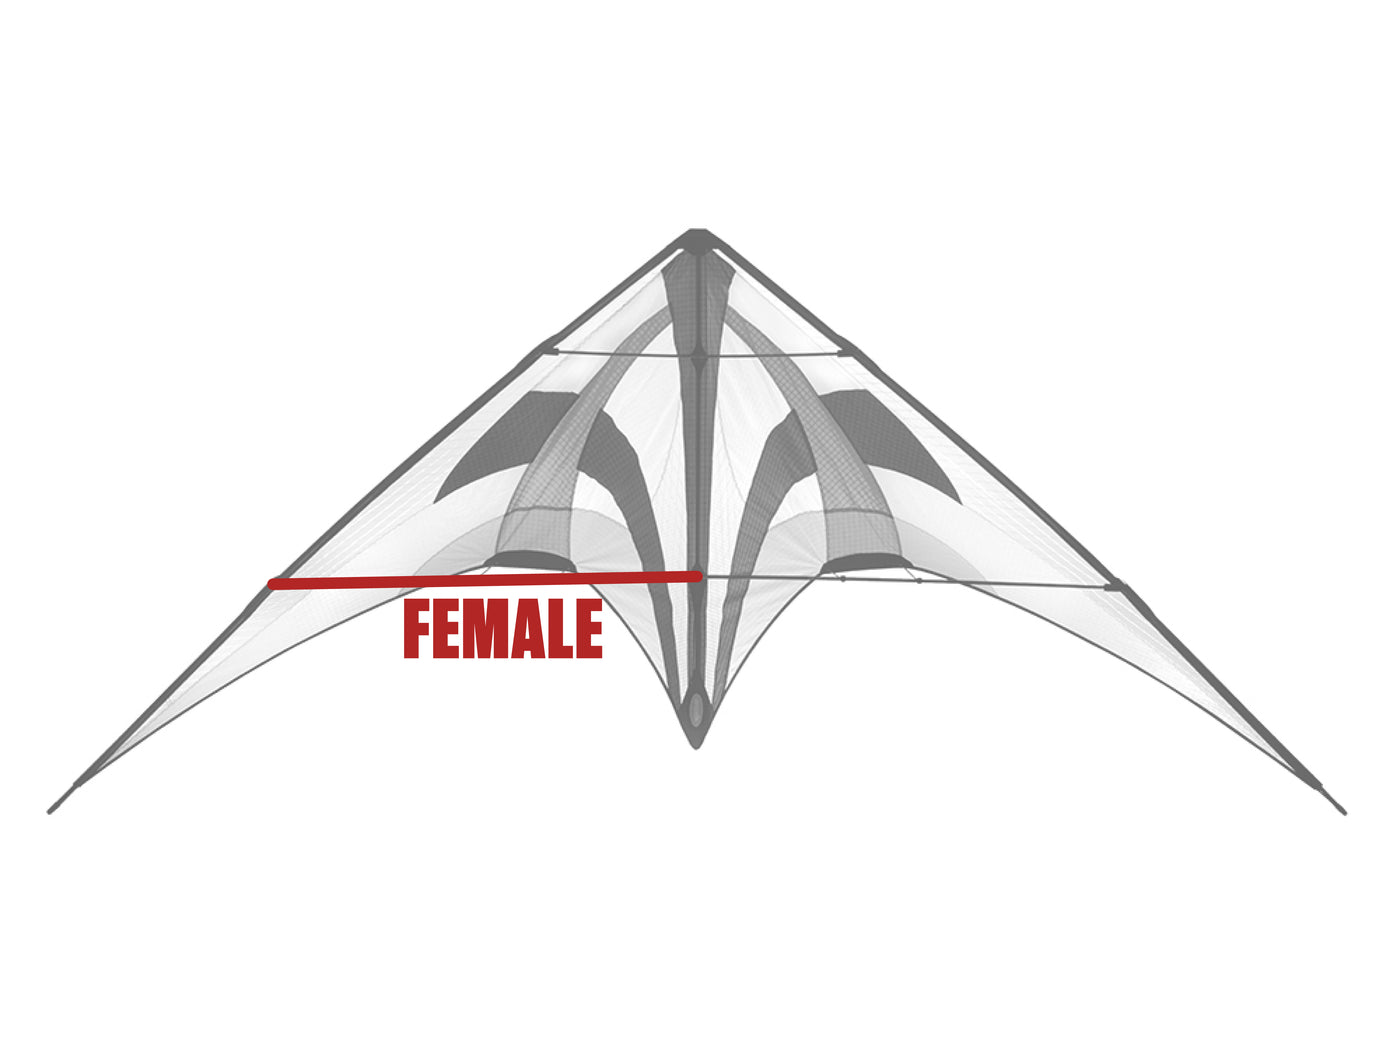 Diagram showing location of the Zephyr Lower Spreader Female on the kite.